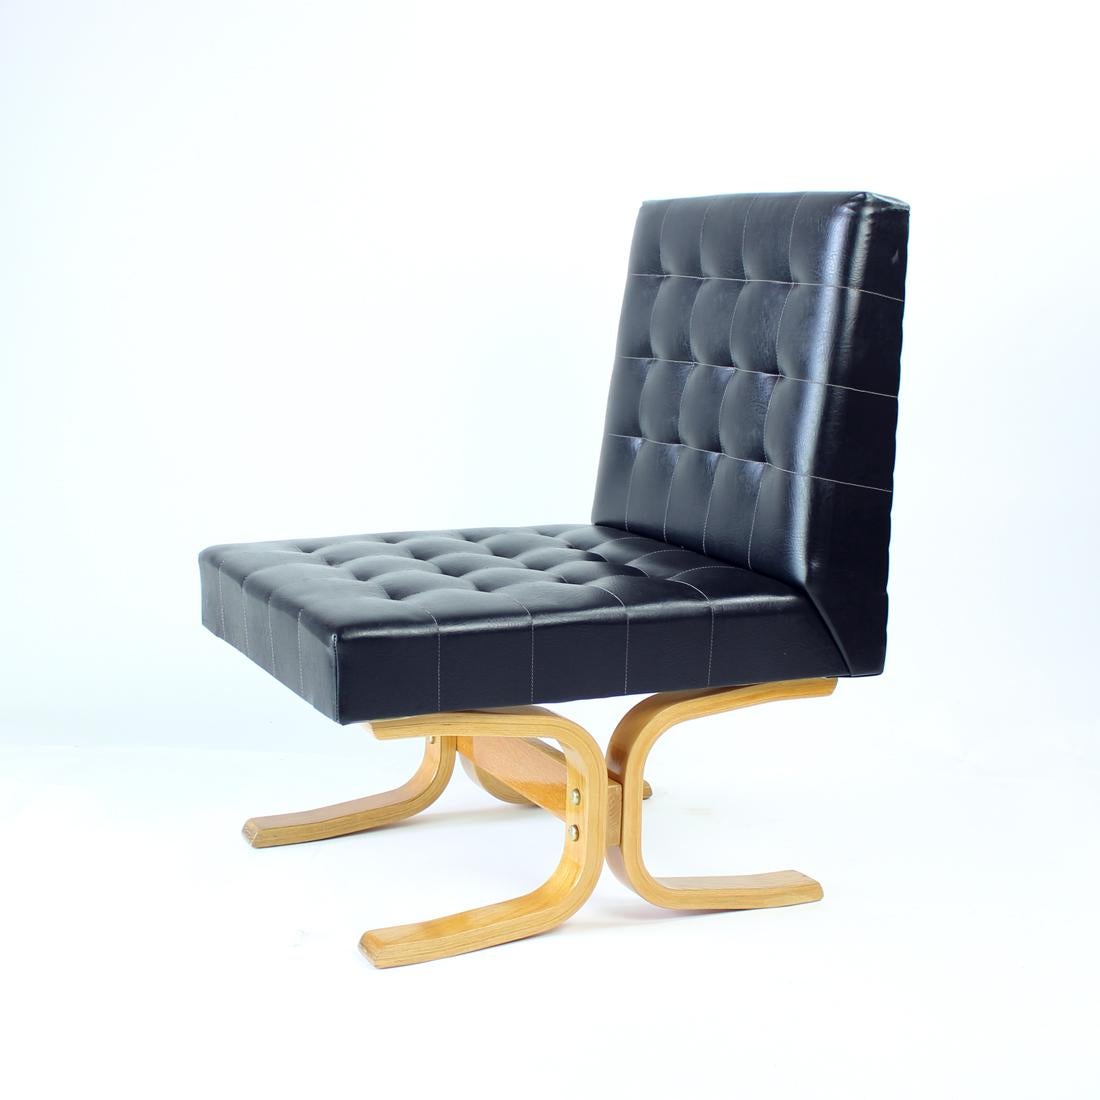 Beautiful, iconic lounge chair named Bratislava after a capital of Slovakia. This lounge chair was produced by Drevopodnik Holesov in 1960s and was designed by Jindrich Volak. The Holesov factory was known for its work with the dent woodlaminate